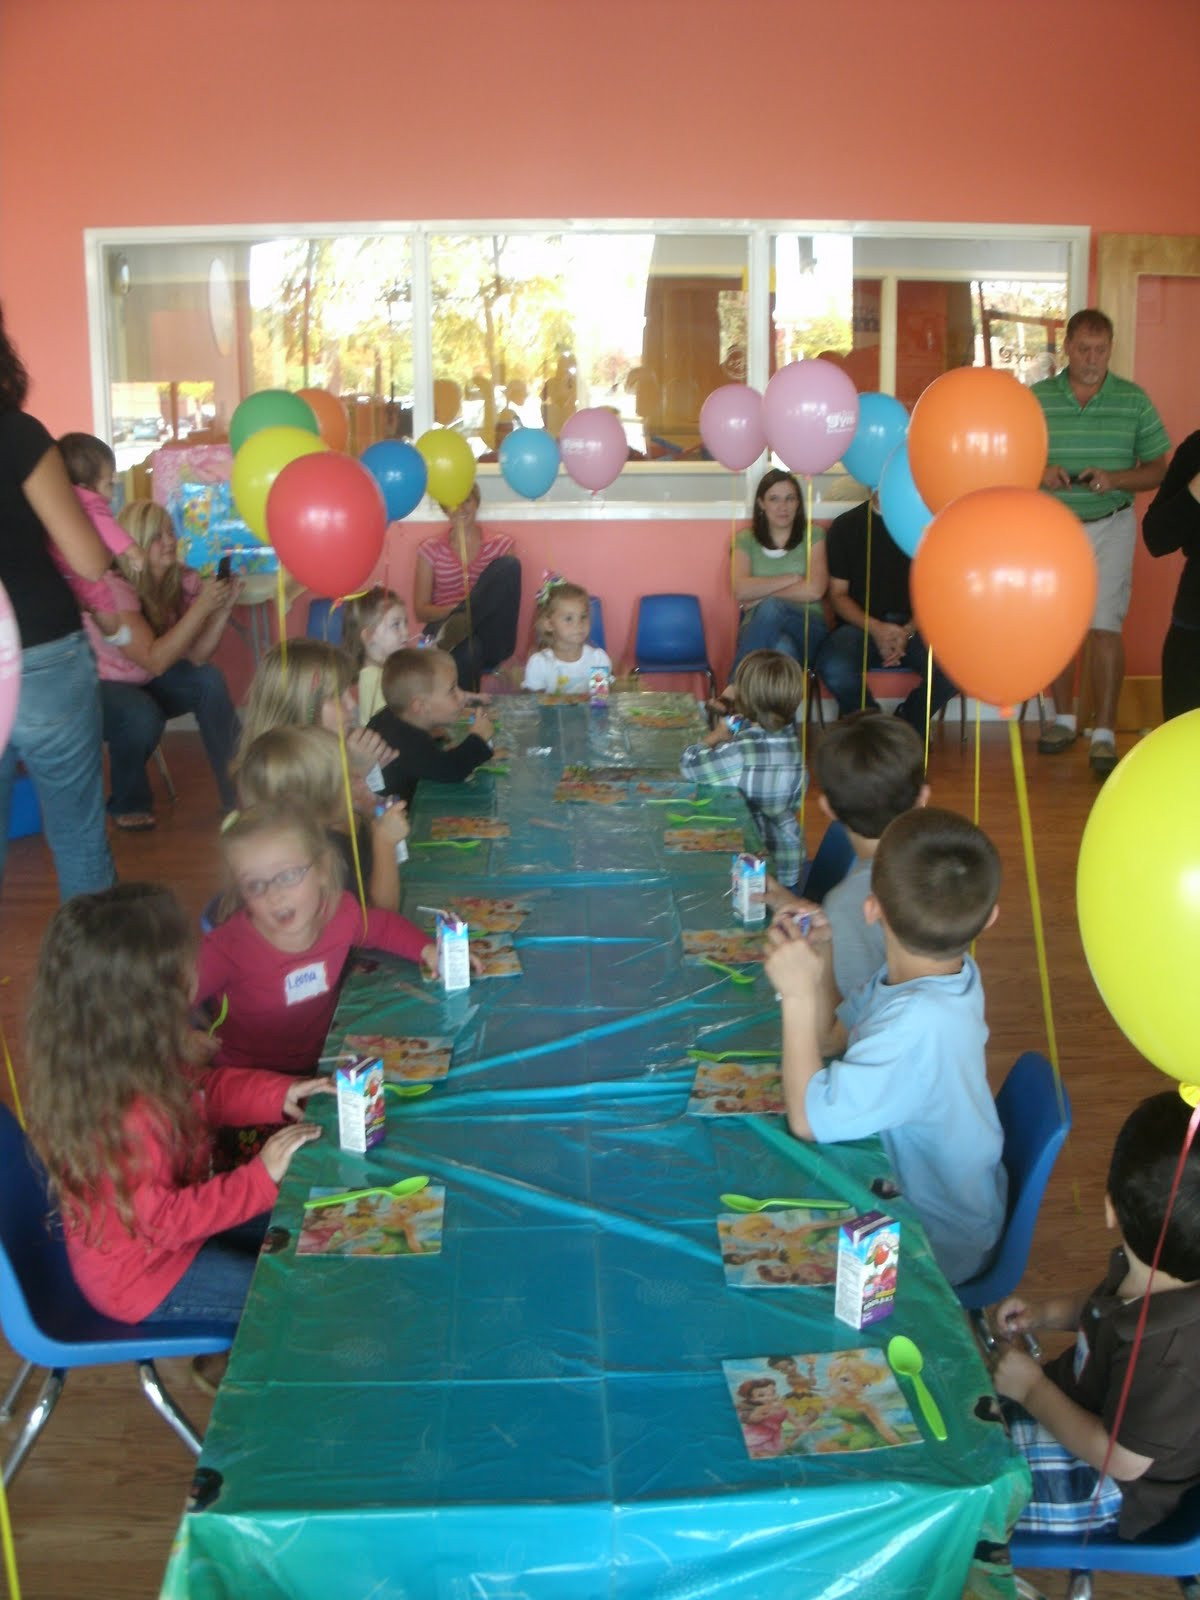 The Little Gym Birthday Party
 Tractors and Bows Caroline s 3rd birthday part at The